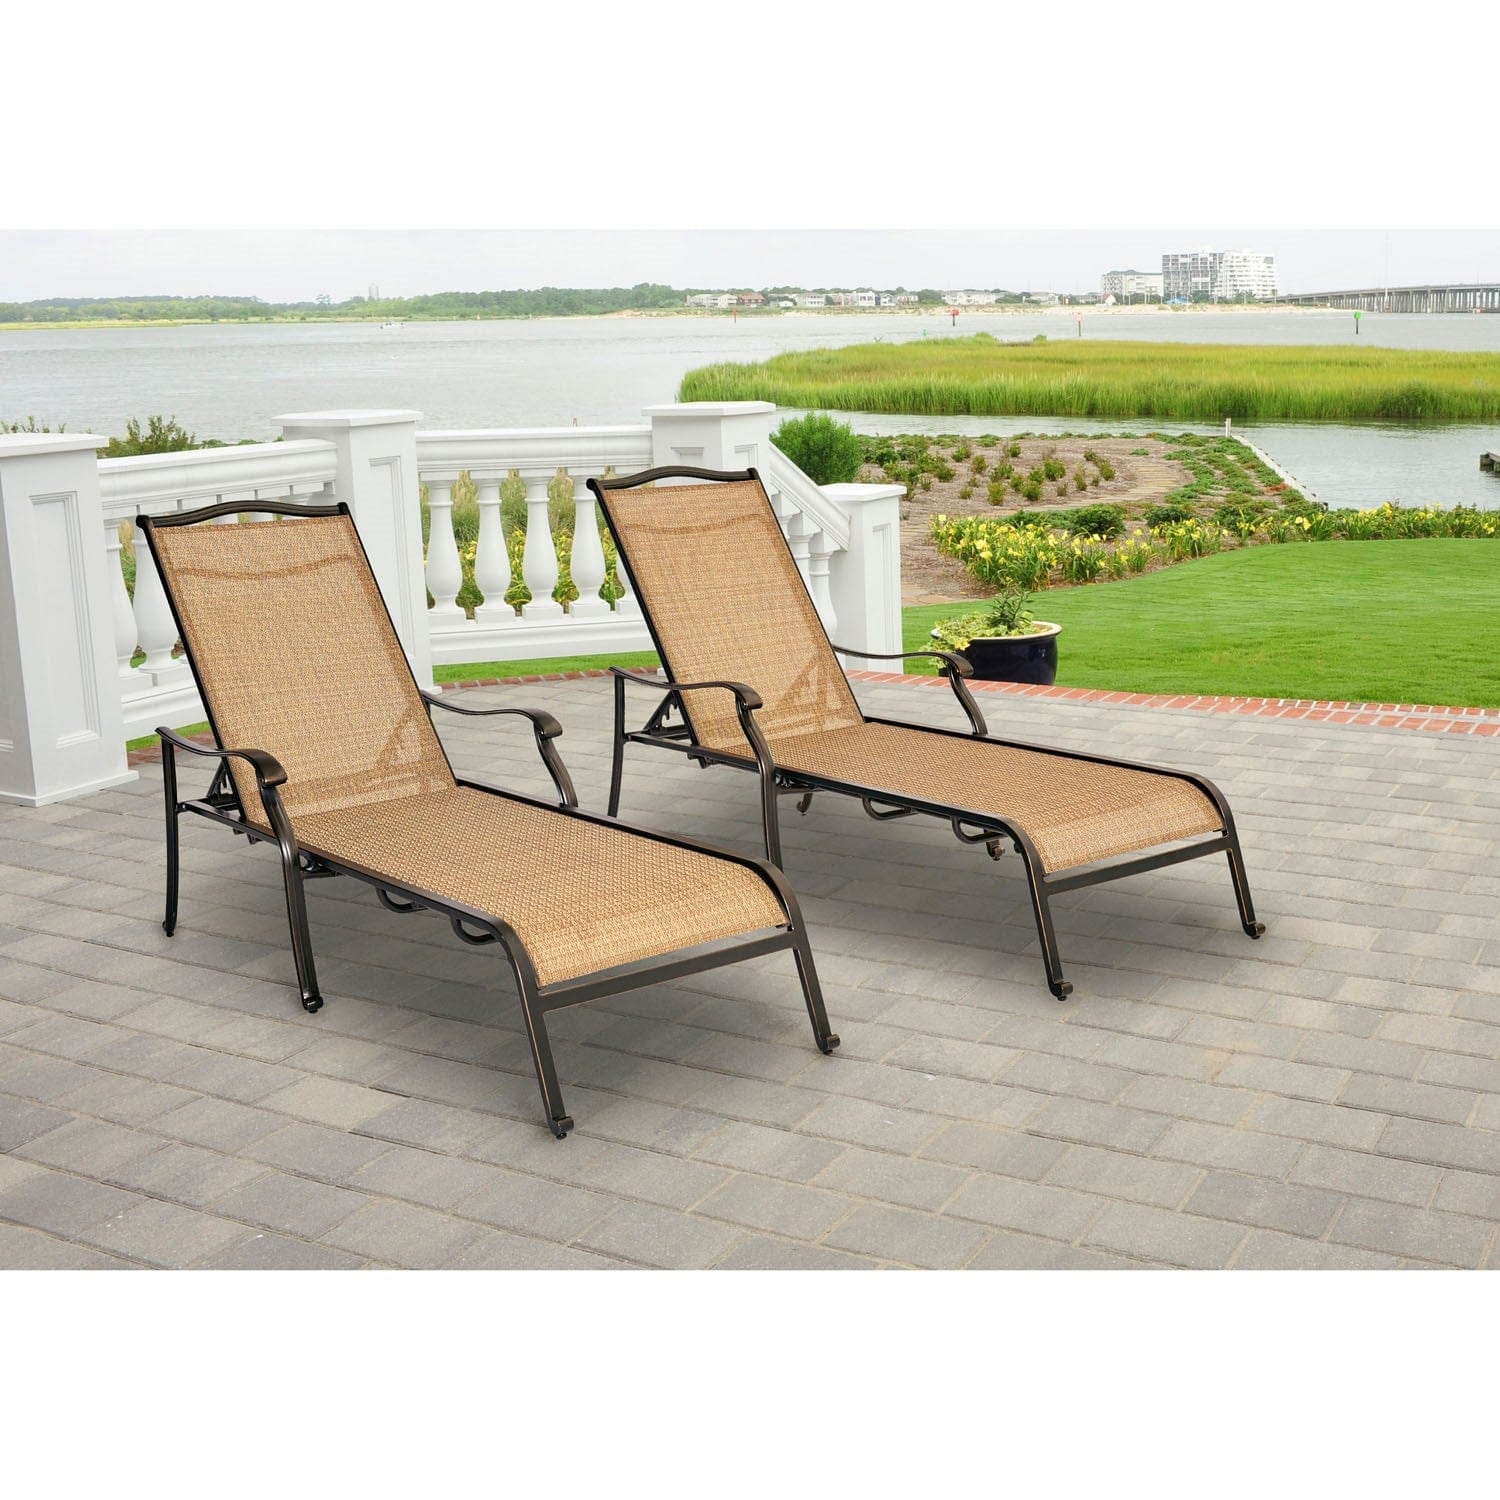 Hanover Chaise Lounge Hanover Monaco Chaise Lounge Chairs - Set of Two - MONCHS2PC